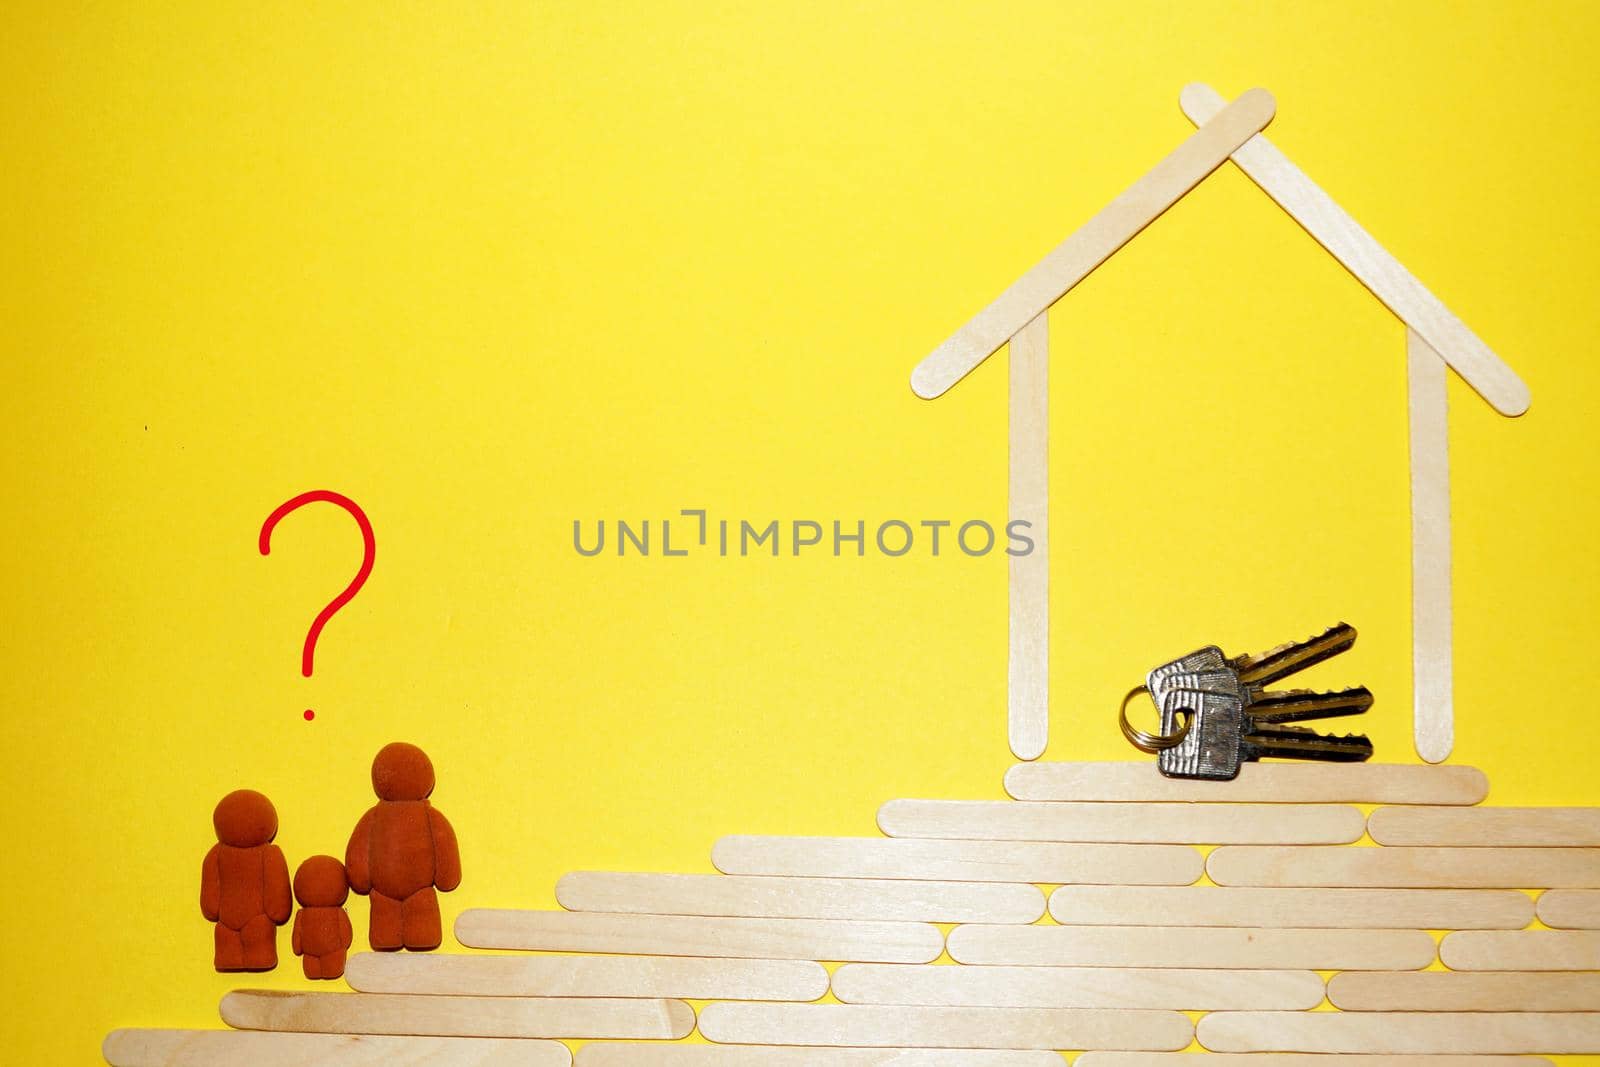 figurines of a man, woman and child climb the stairs, there is a question mark above them, to the house with keys, mortgage concept by Annado